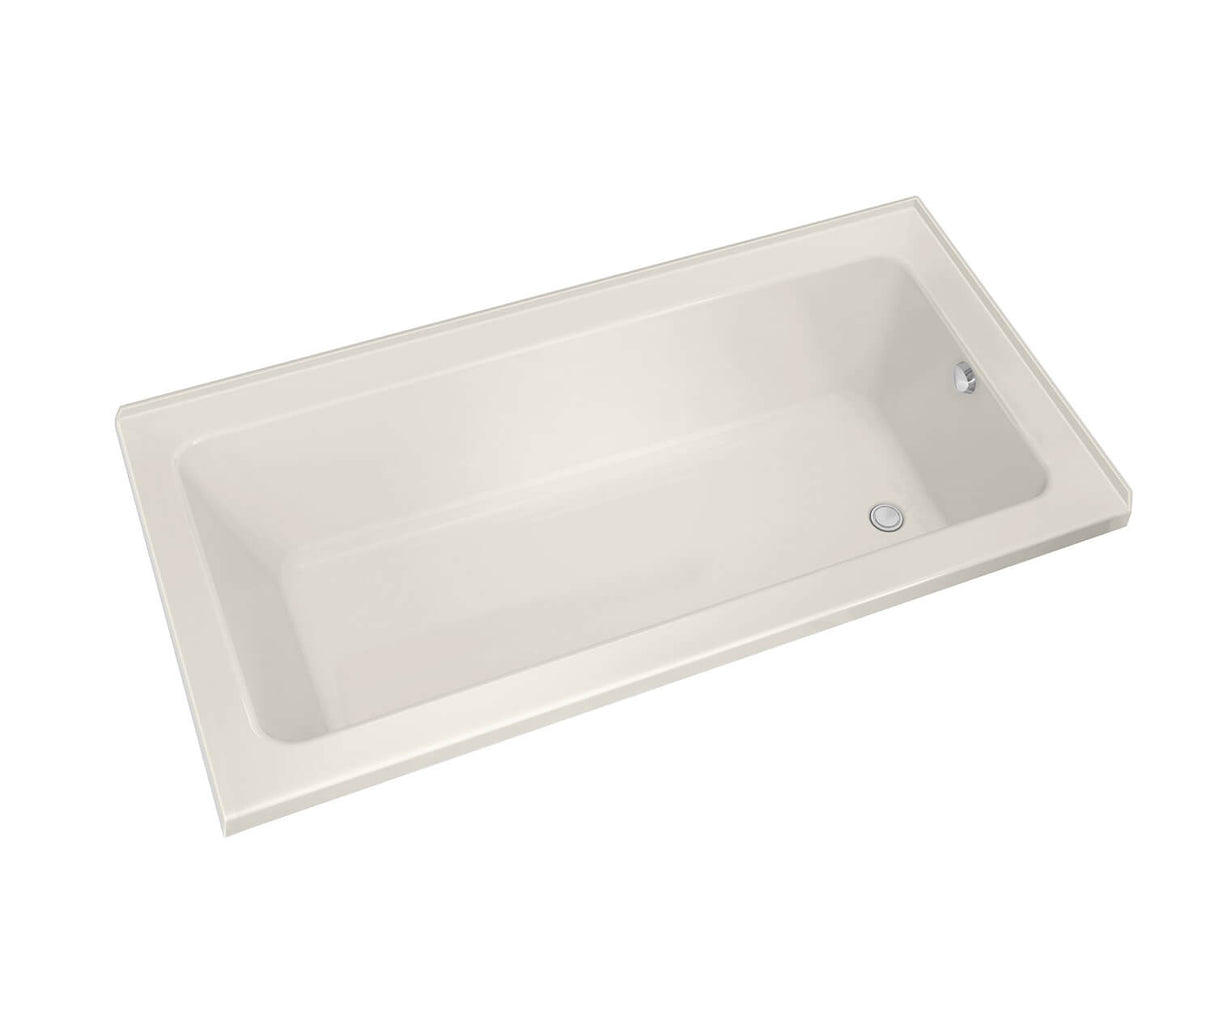 MAAX 106212-L-003-007 Pose 7236 IF Acrylic Corner Right Left-Hand Drain Whirlpool Bathtub in Biscuit